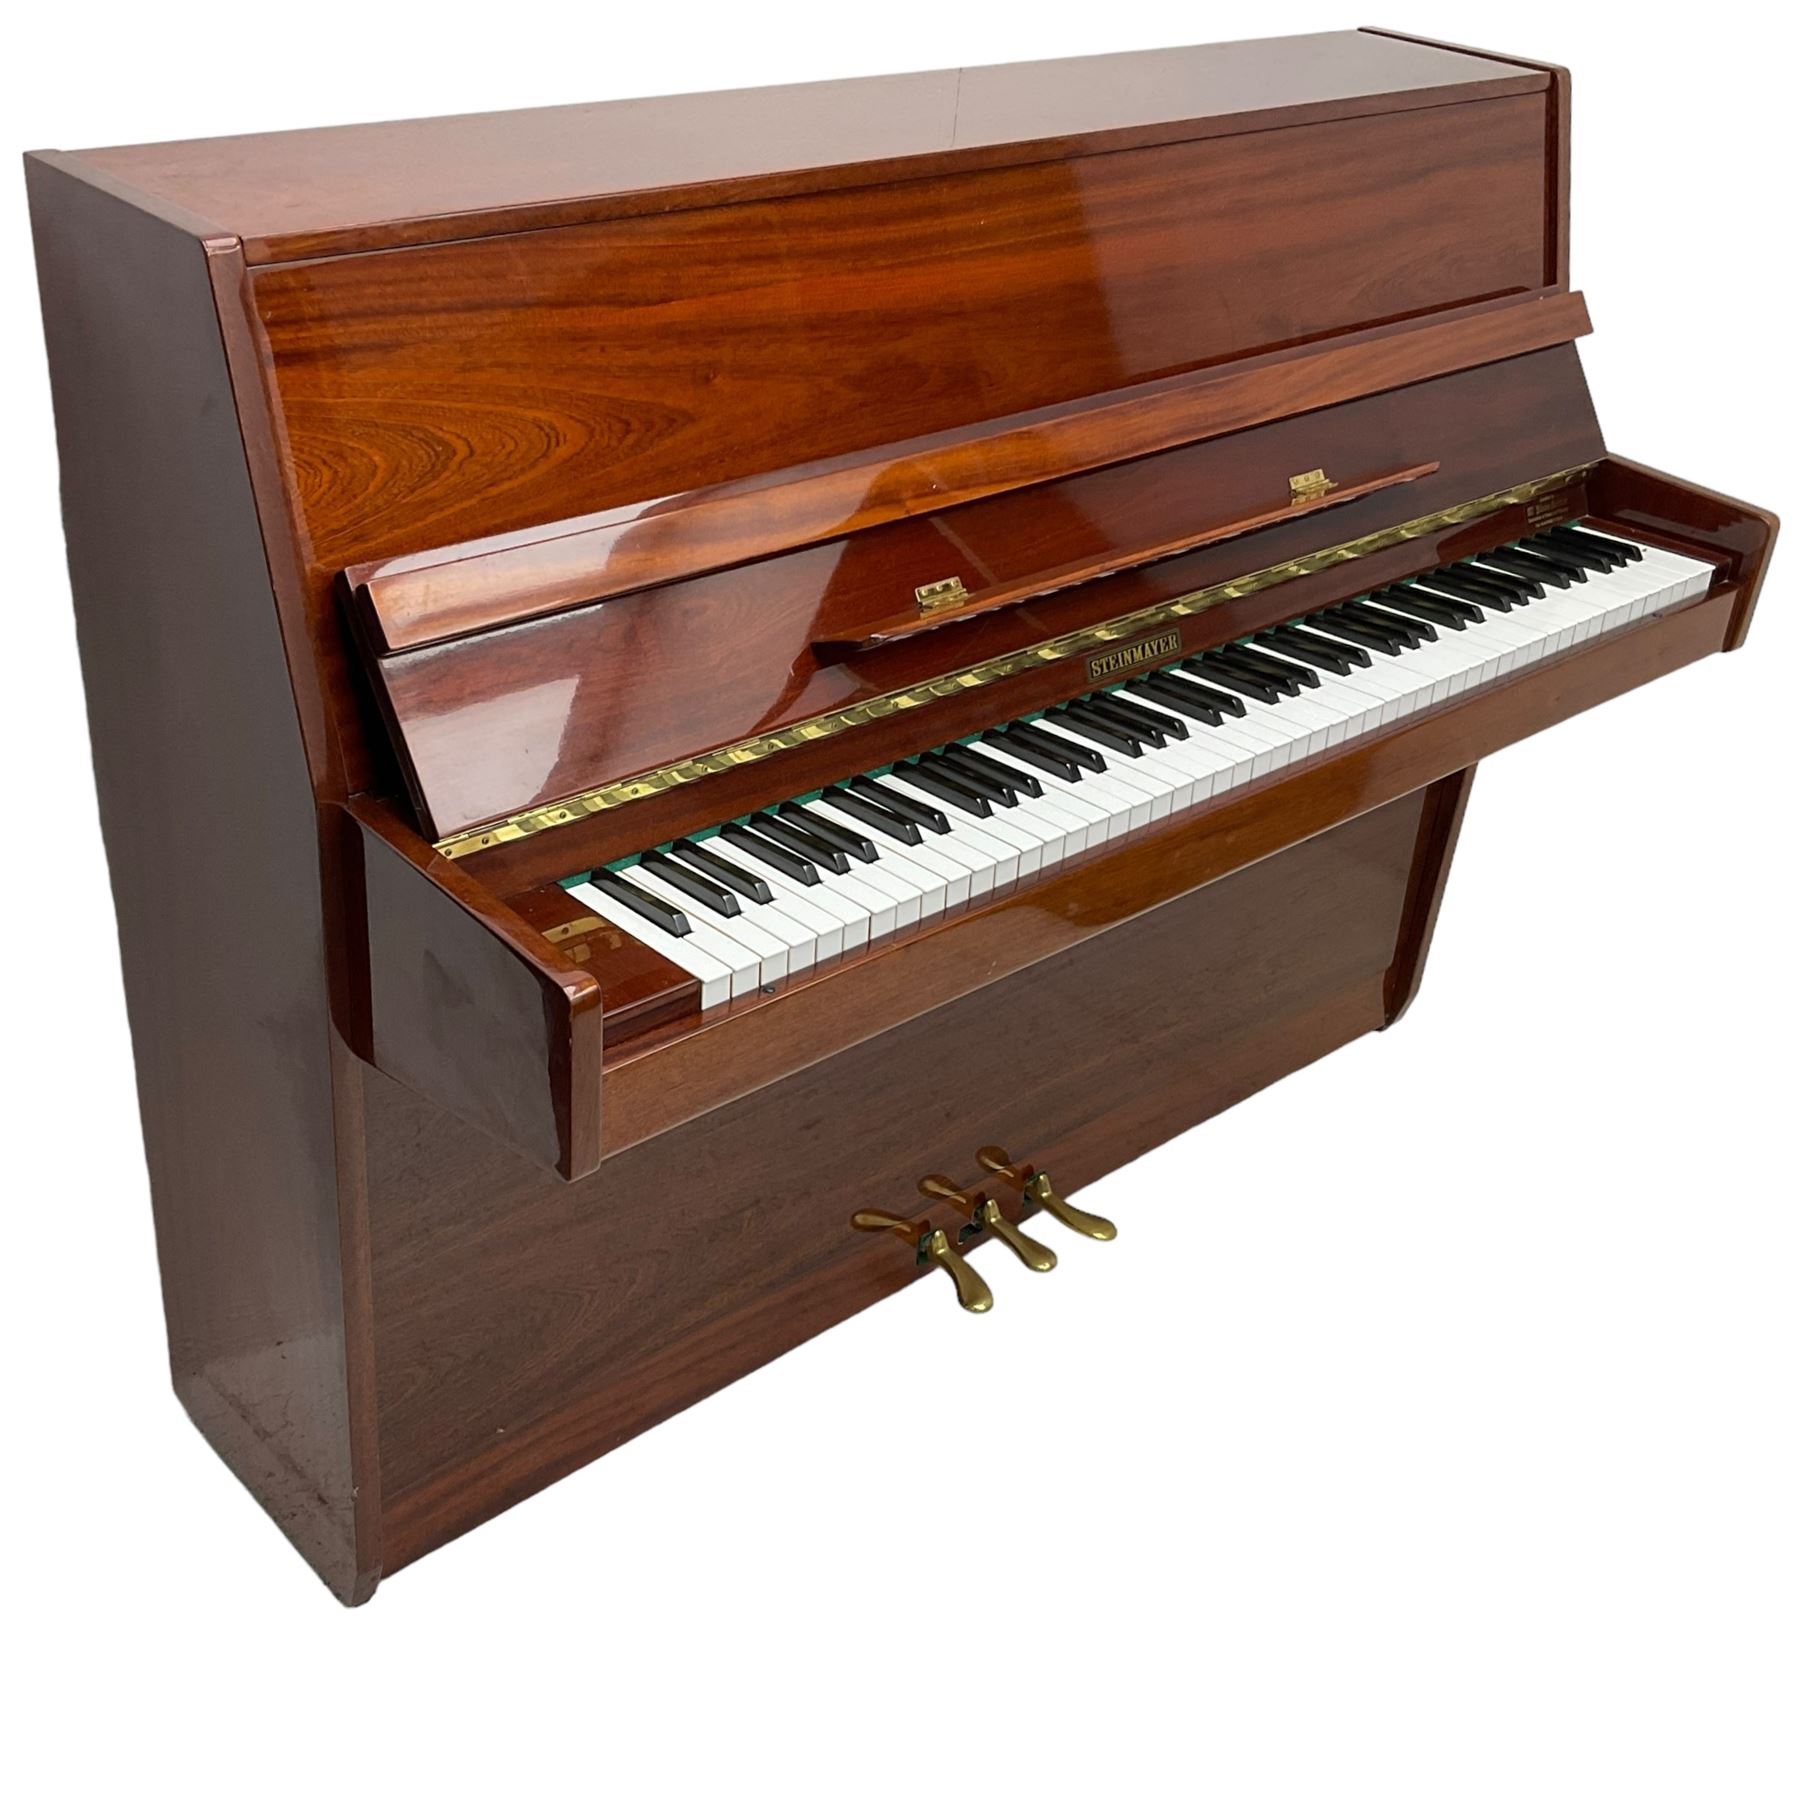 Steinmayer upright series 108 piano in sapele mahogany case - Image 5 of 11